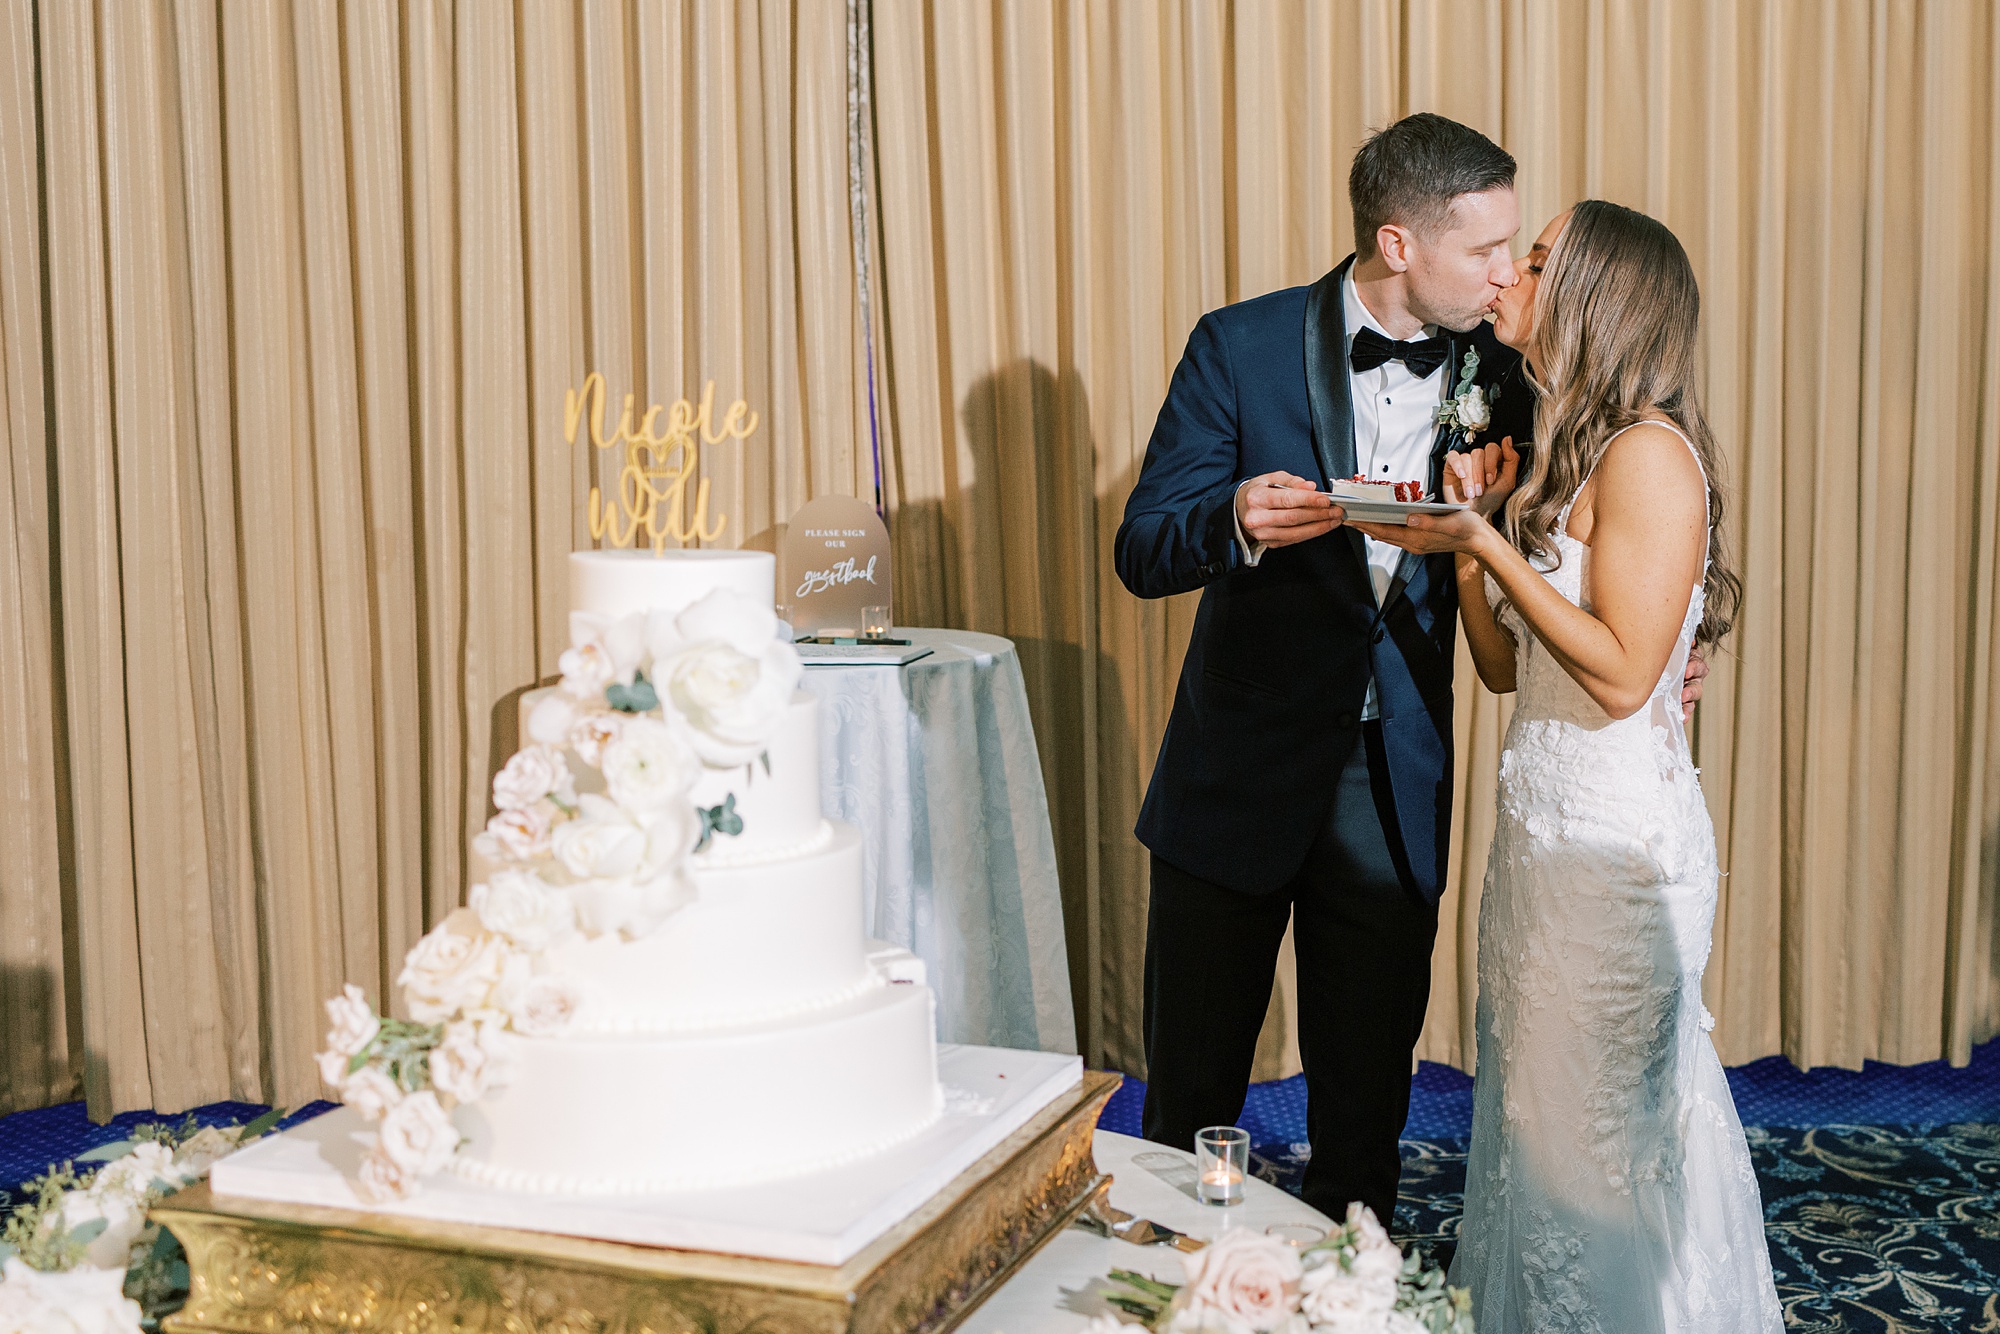 bride and groom kiss by wedding cake at New Jersey wedding reception 